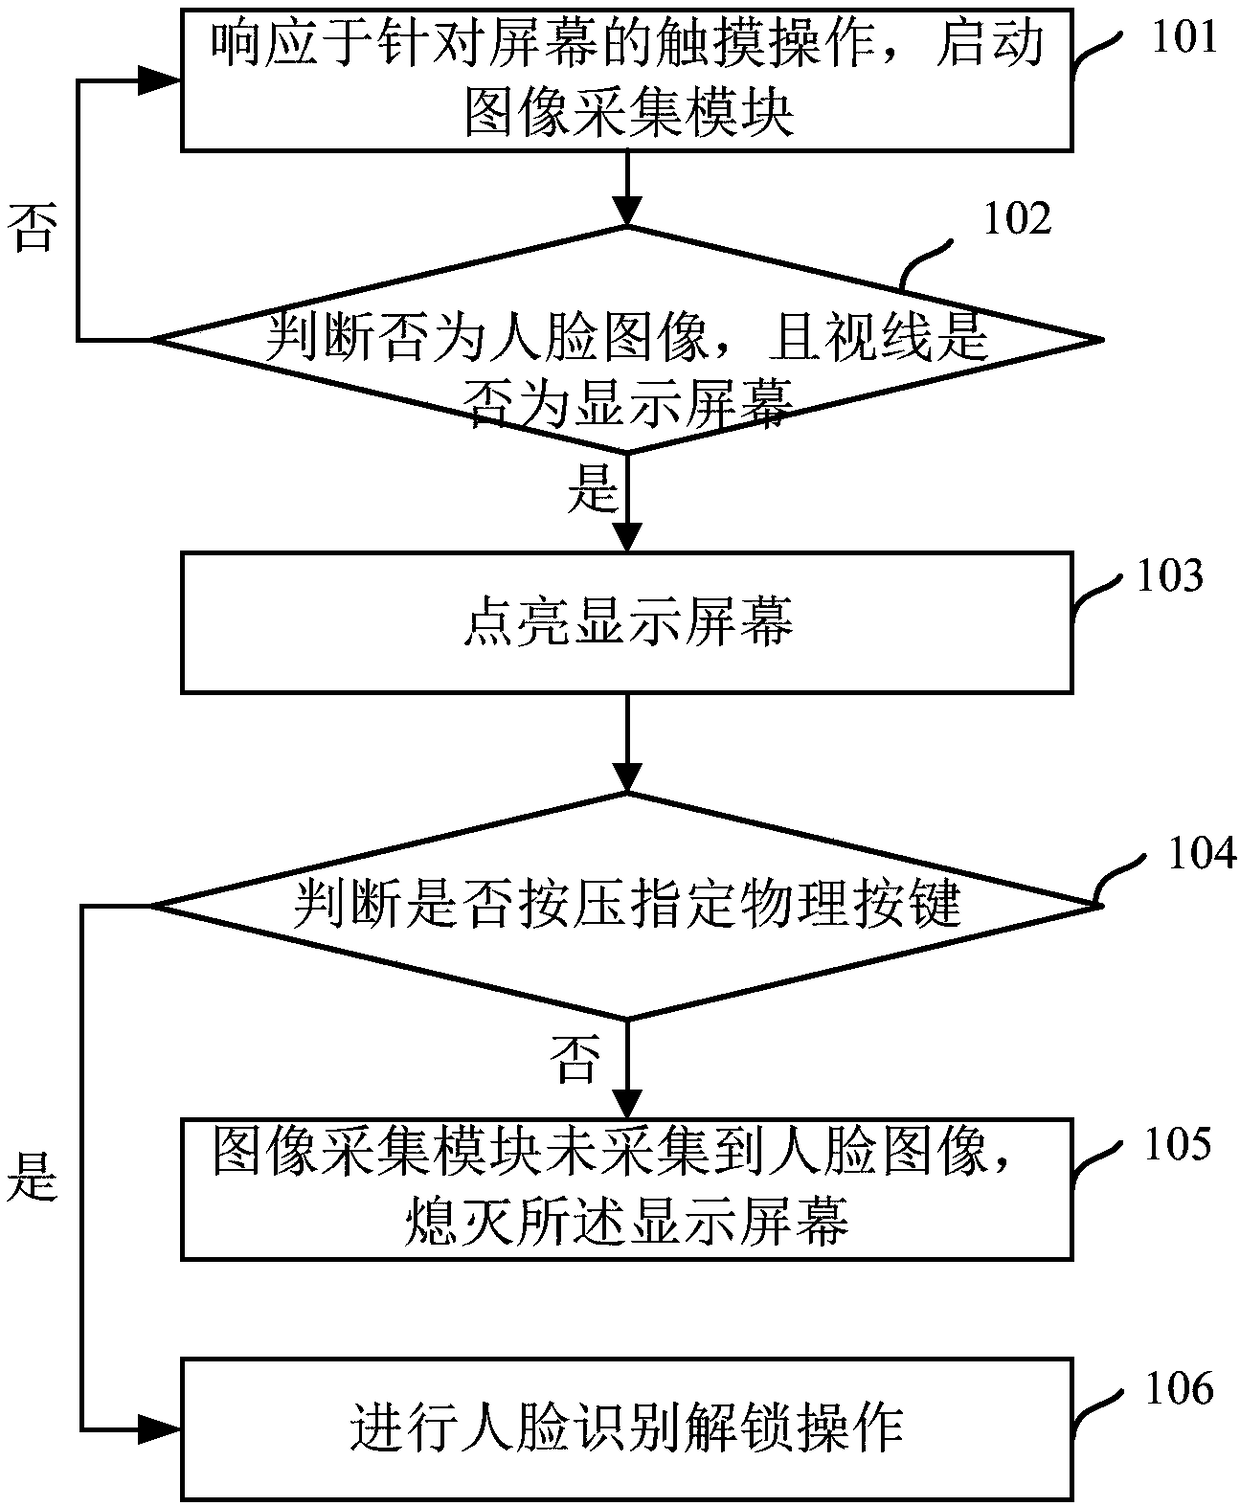 Human face identification-based unlocking method and apparatus, and mobile terminal